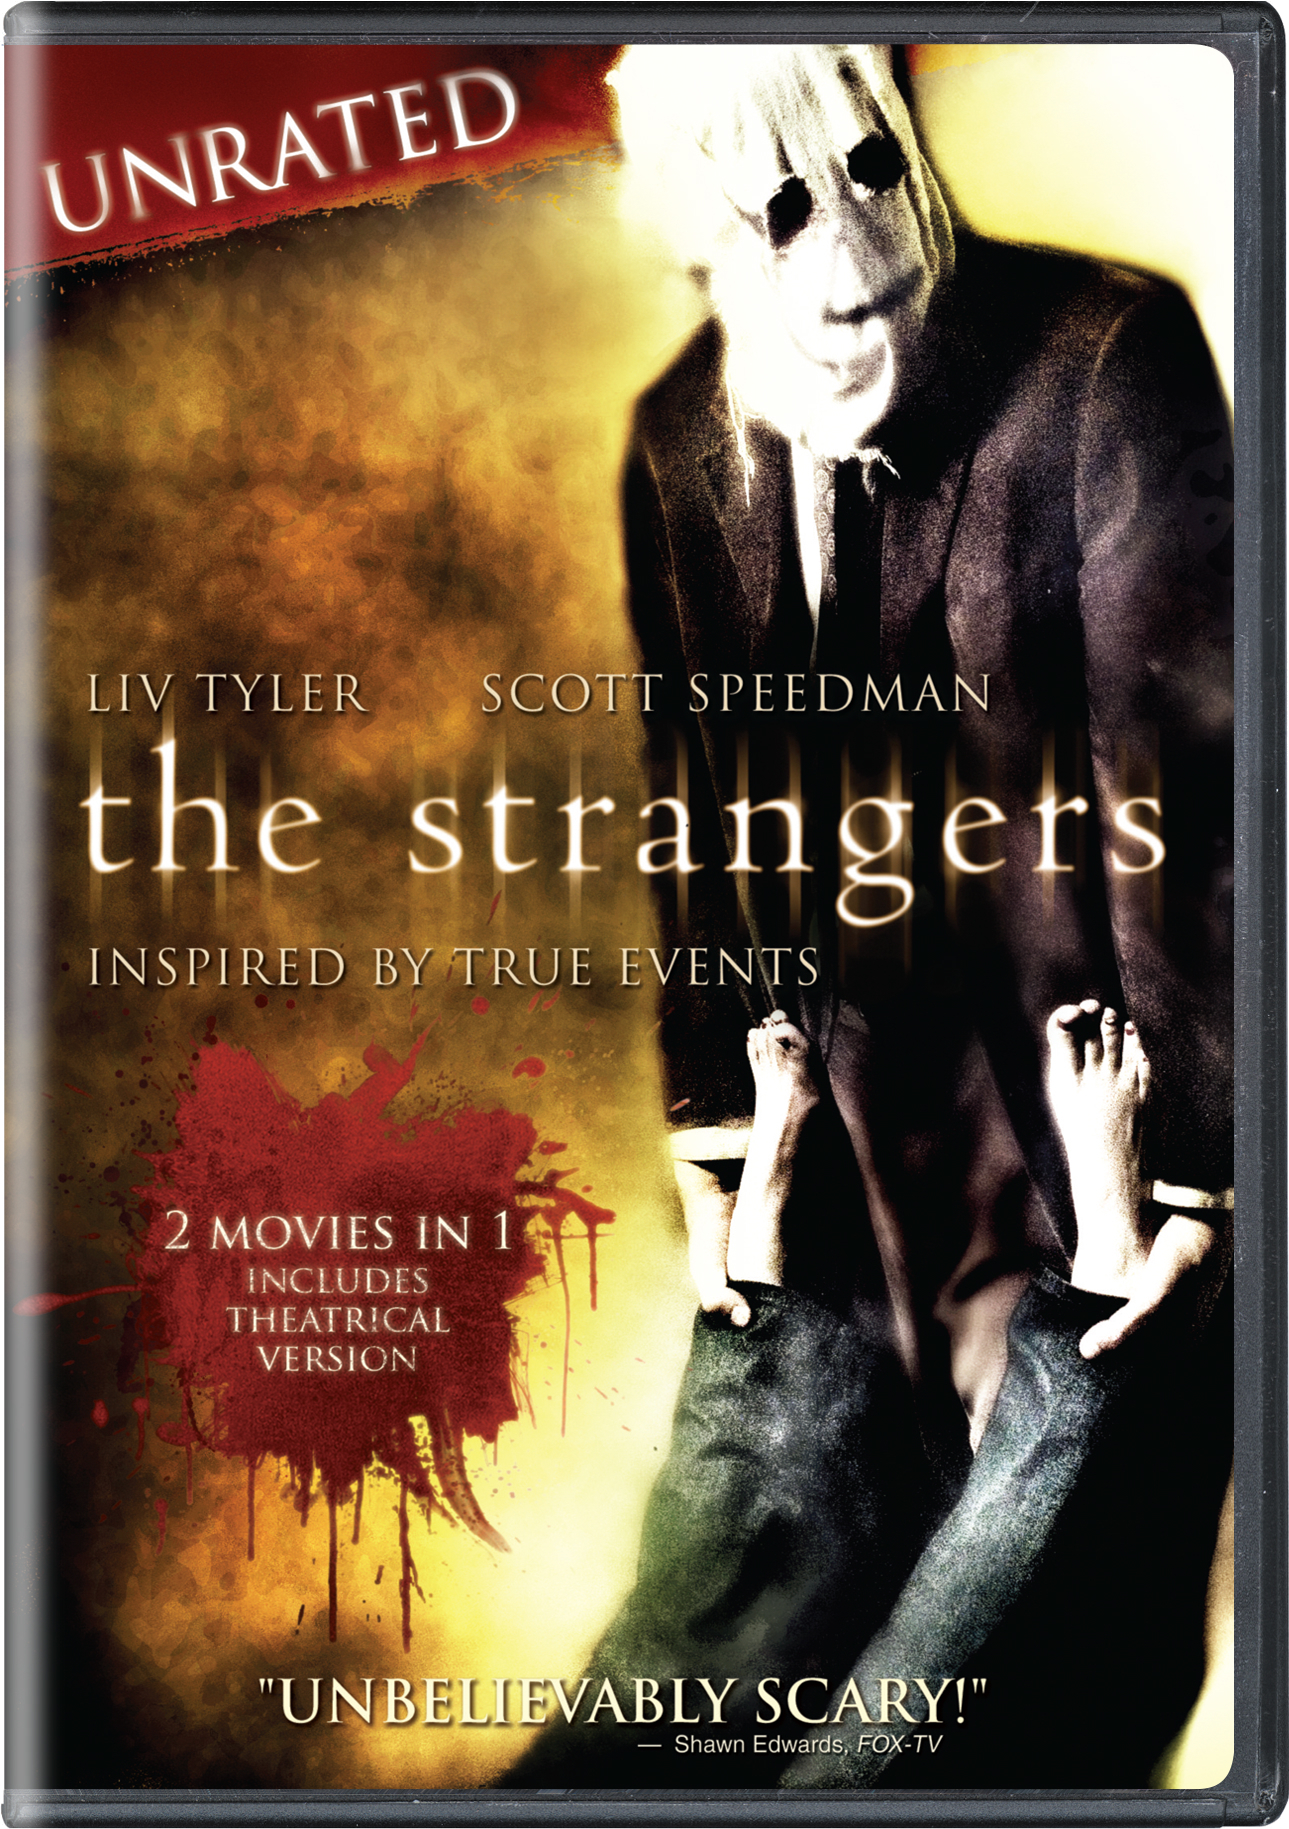 The Strangers (DVD Unrated) - DVD [ 2008 ]  - Horror Movies On DVD - Movies On GRUV